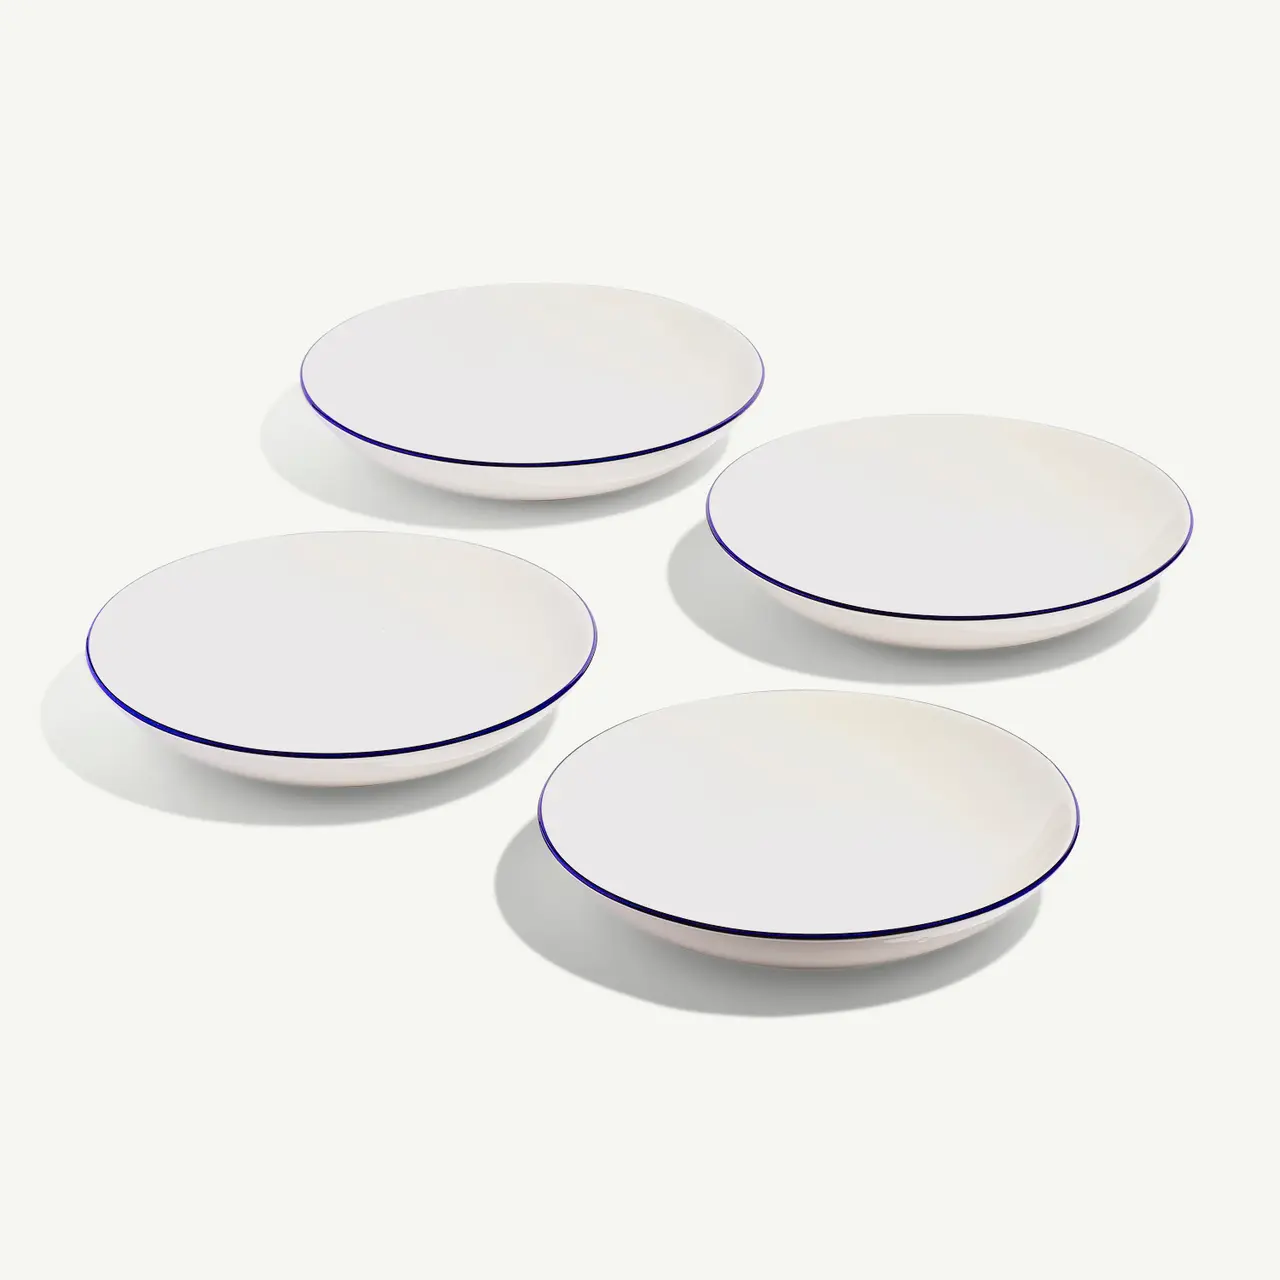 Three white plates with blue rims are arranged on a light background.